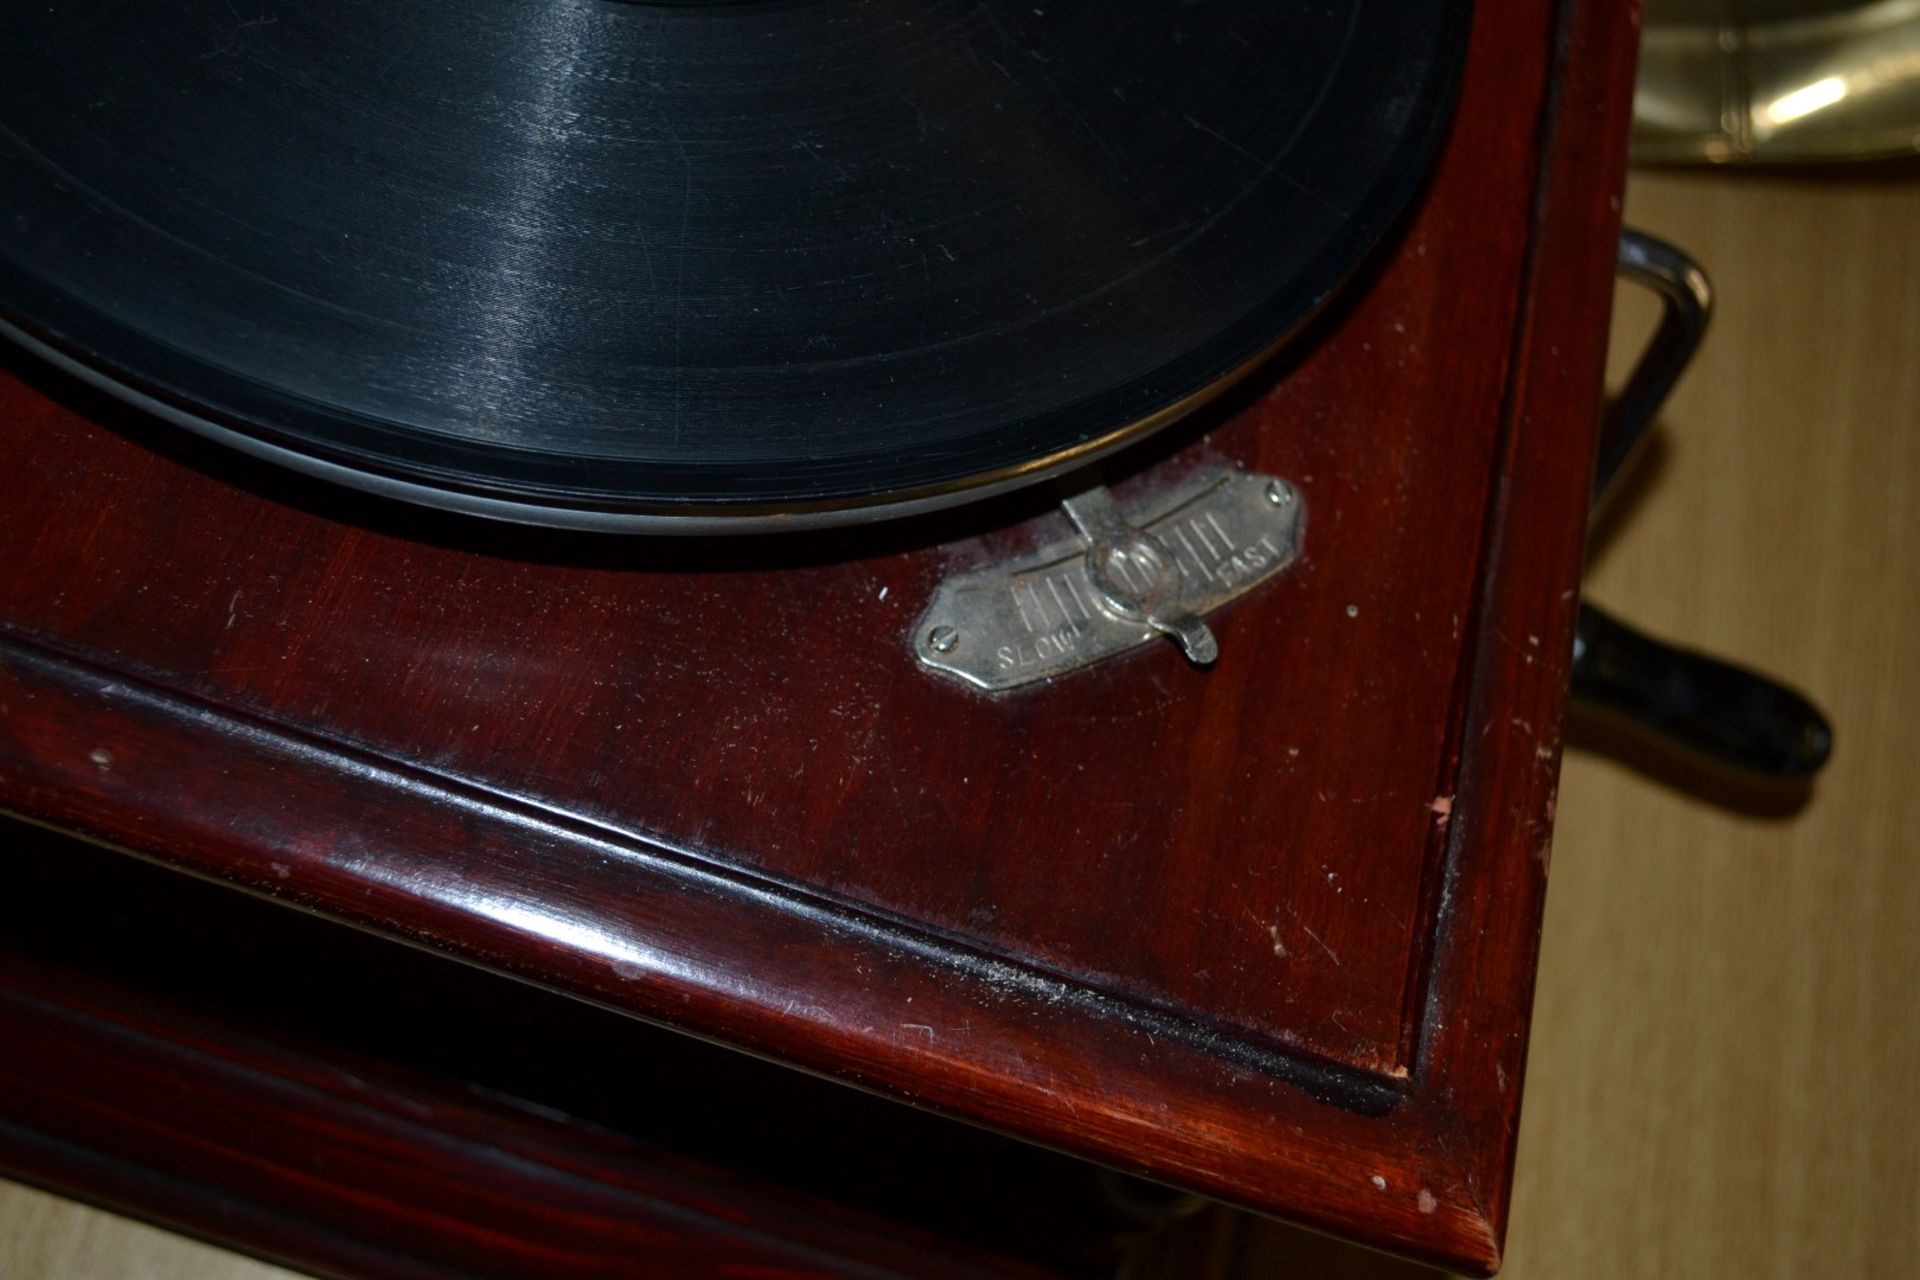 1 x 'His Masters Voice' Branded Gramophone - Dimensions: 37 x 37 x H21cm - Ref BB1165 / KS - Image 9 of 16